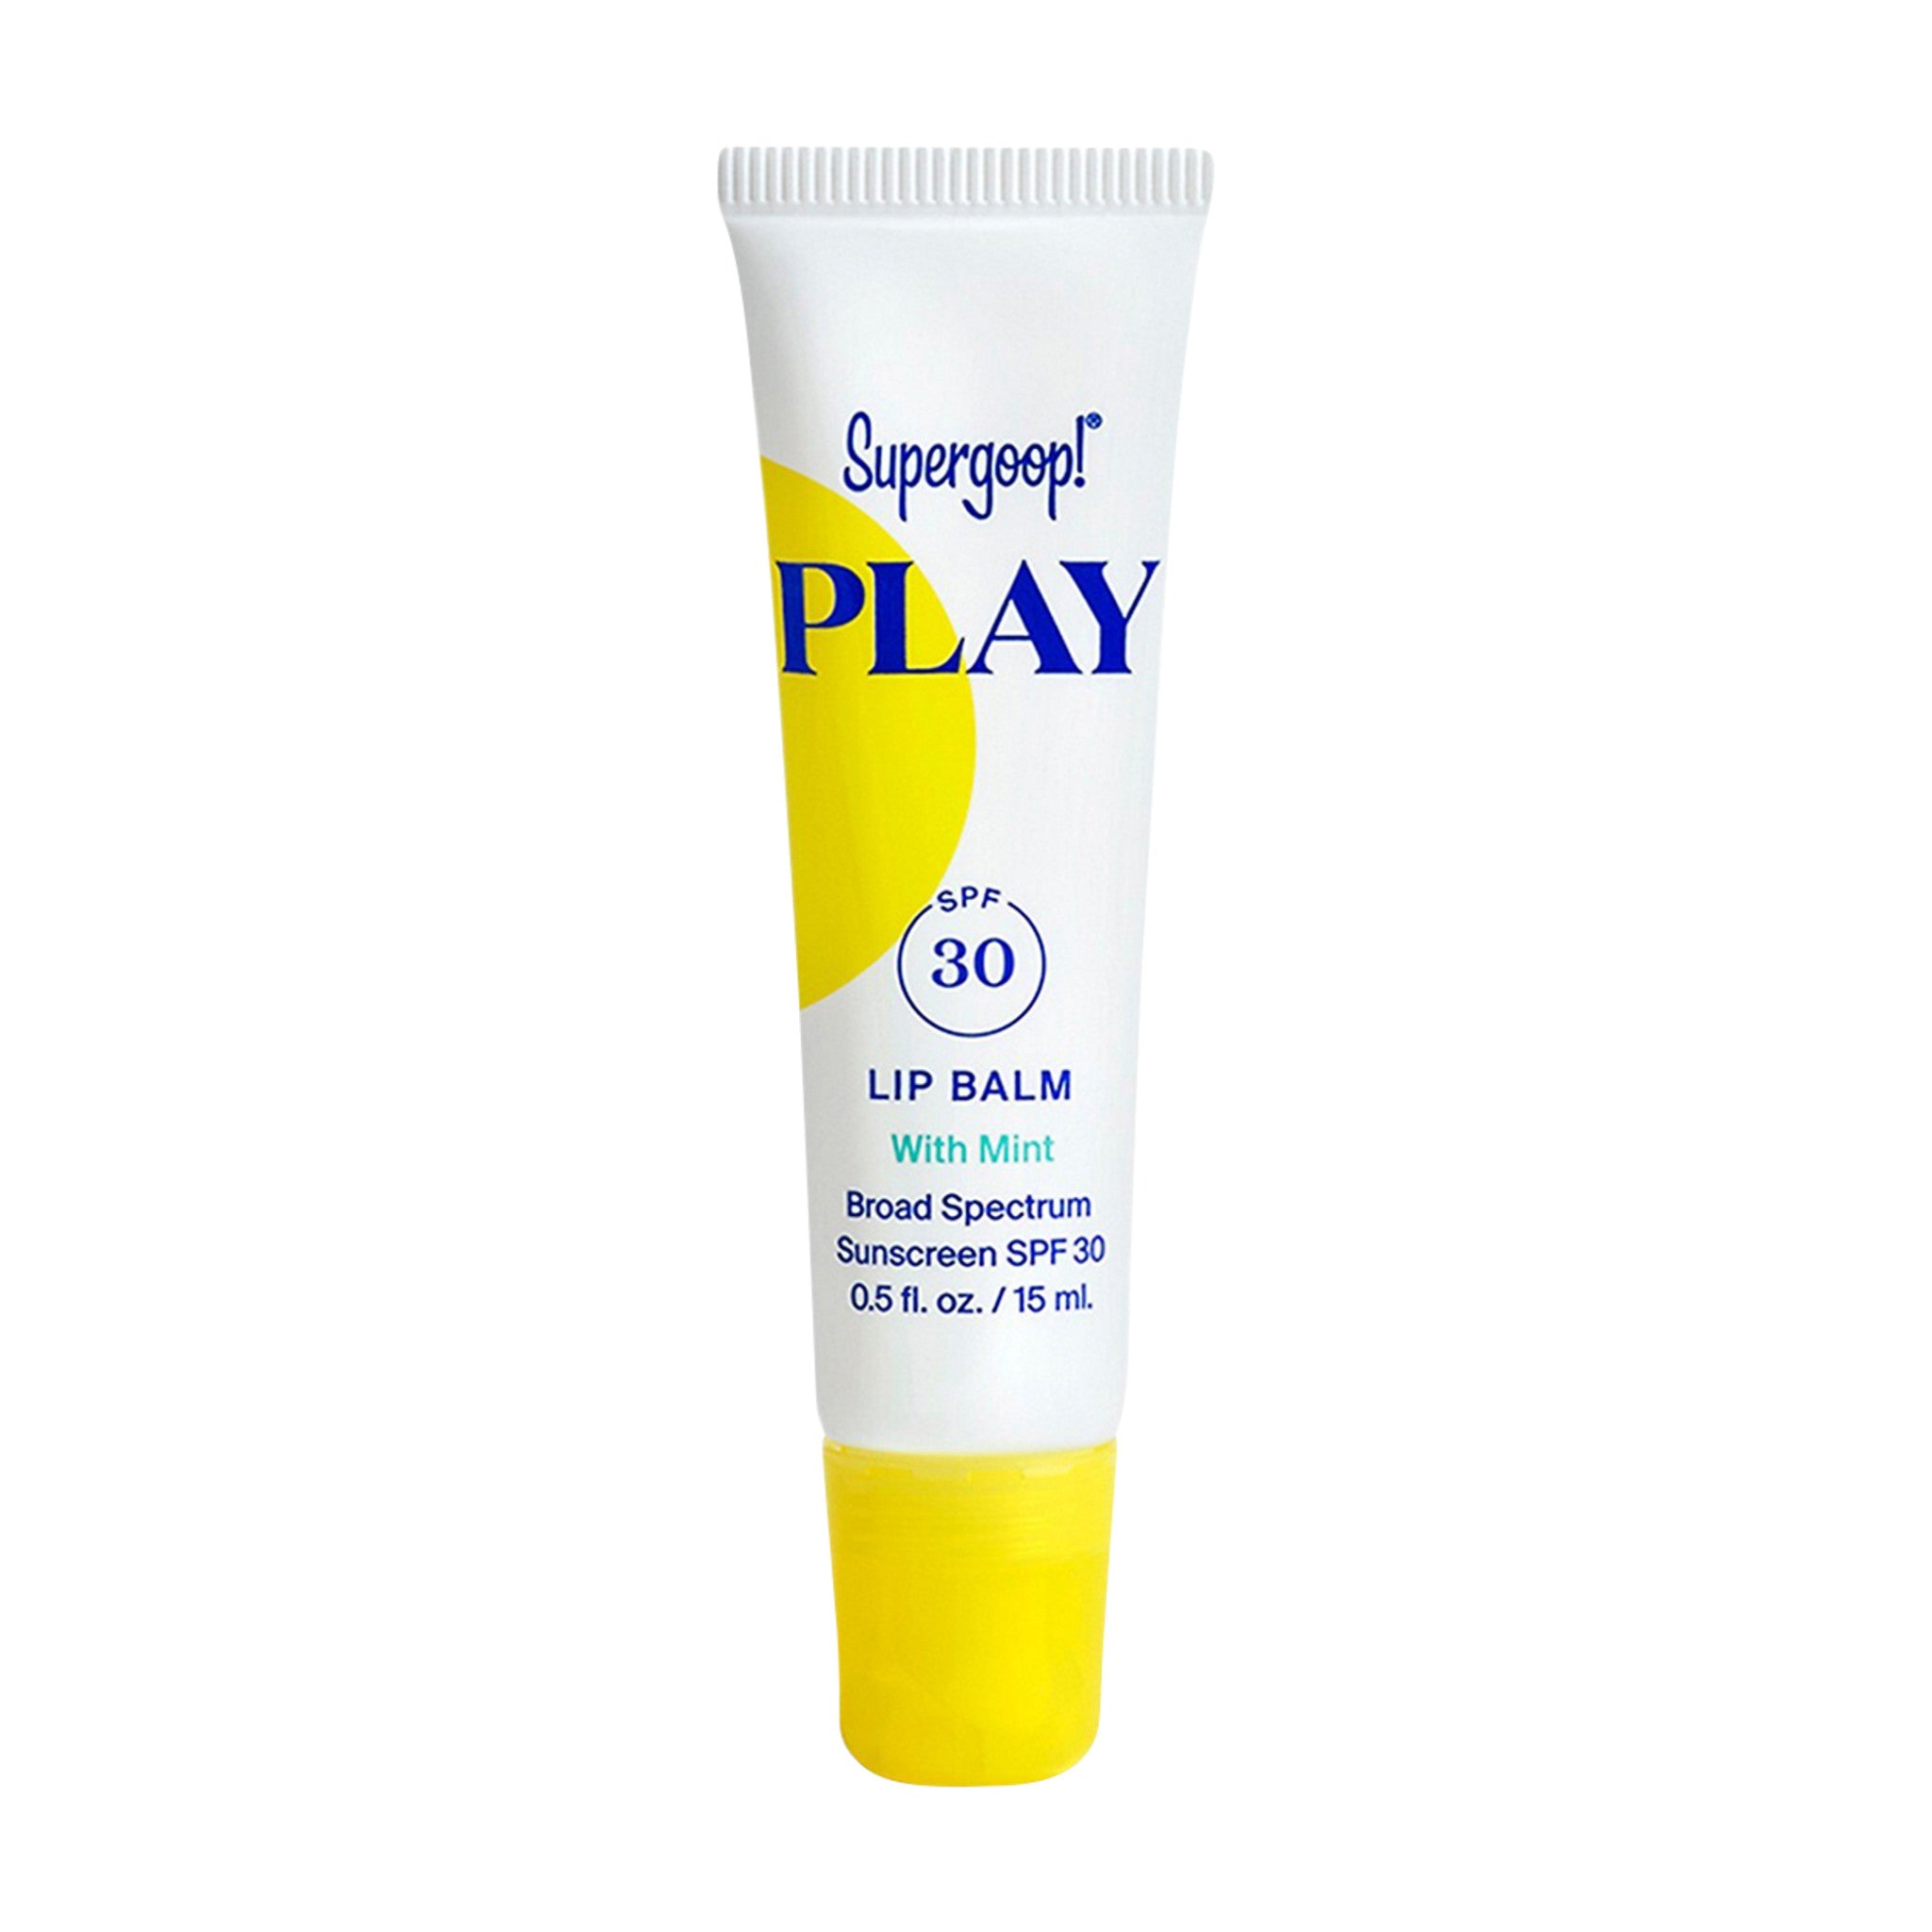 Supergoop! Play Lip Balm Mint SPF 30 main image. This product is in the color clear